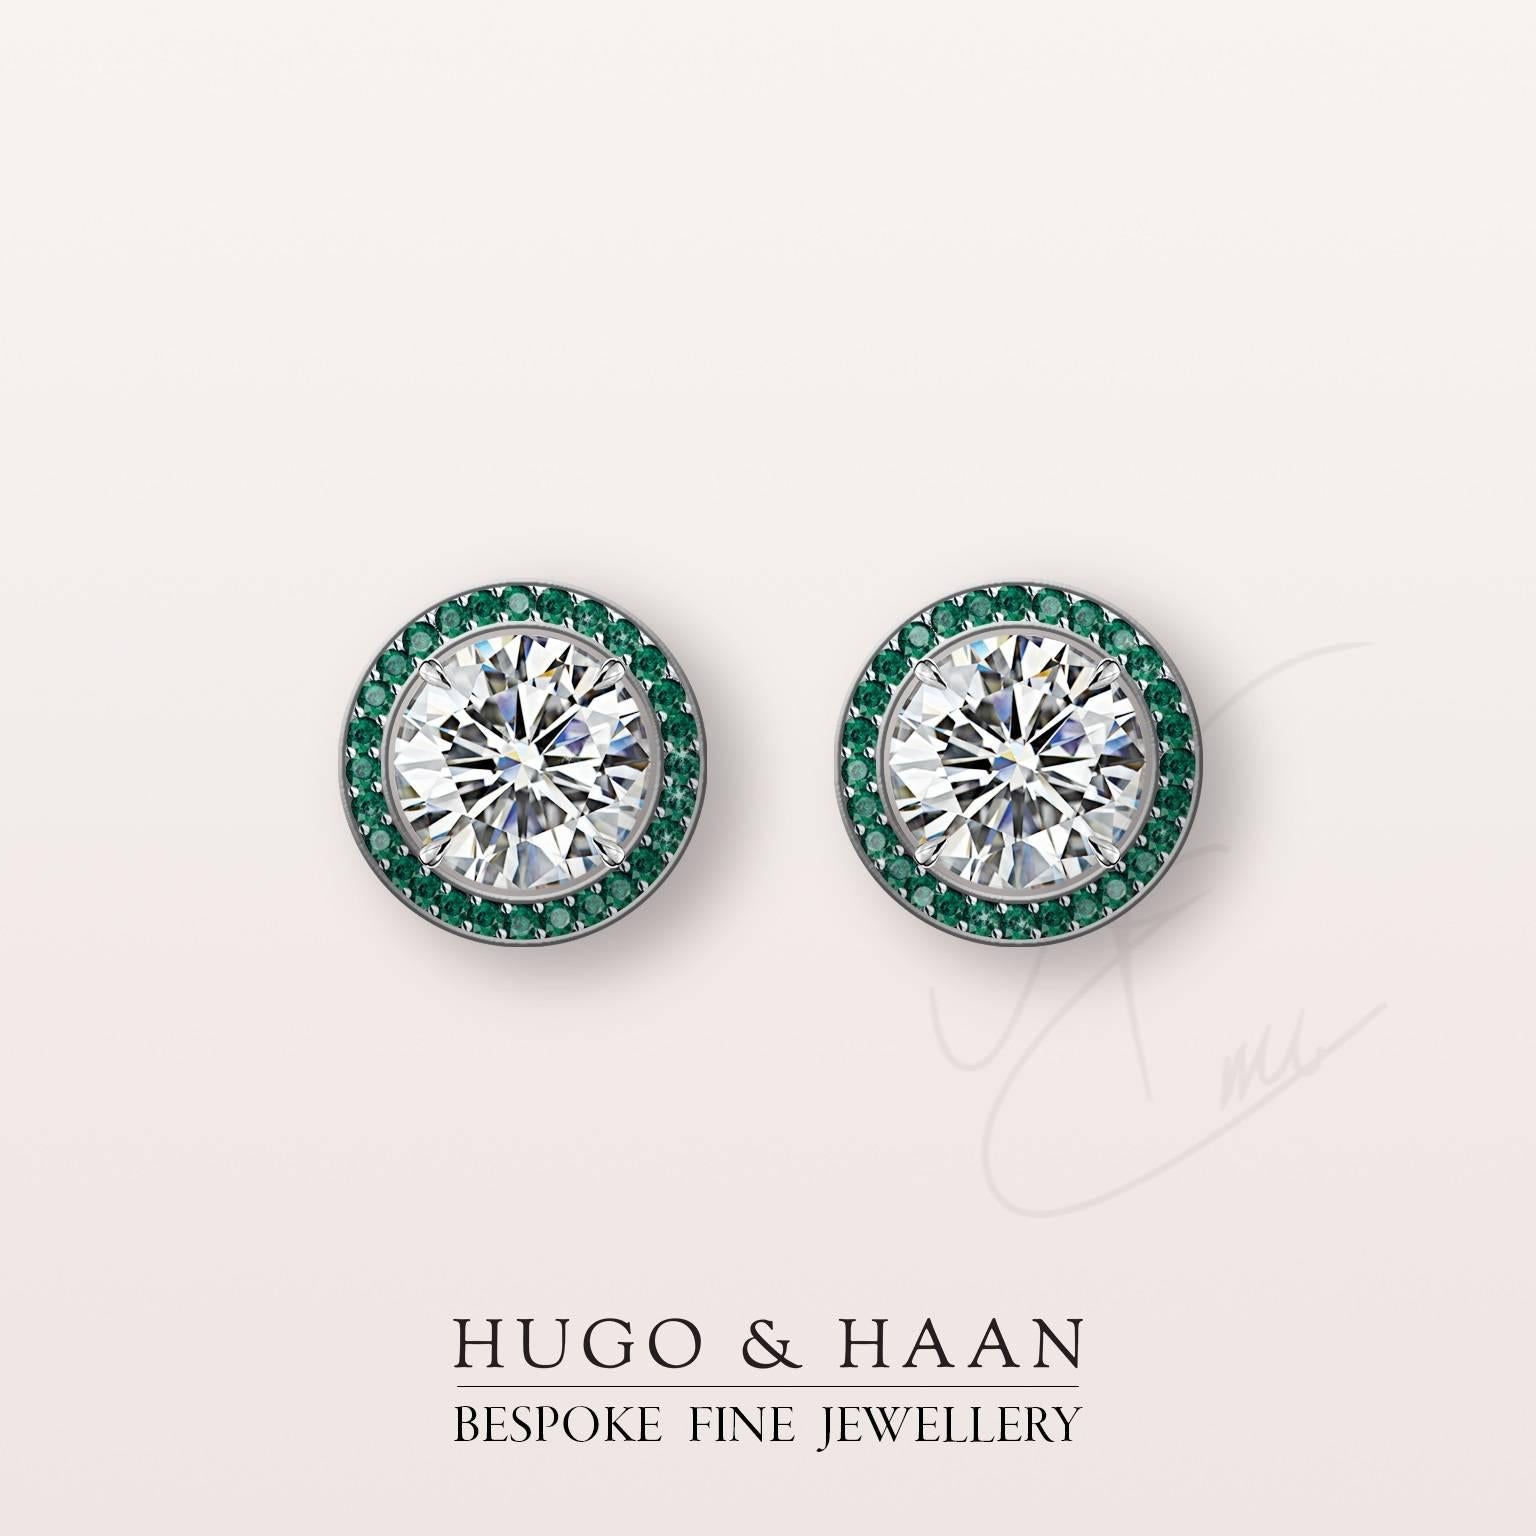 Details:

Material : Platinum
Principle Gemstone : Round Brilliant Cut White Diamond
Other Gemstone : Round Emeralds
Total Diamond Carat Weight : over 2 tcw 
Diamonds Certified: Yes - GIA certified
Customizable: Yes

Options to customize: 

Metals